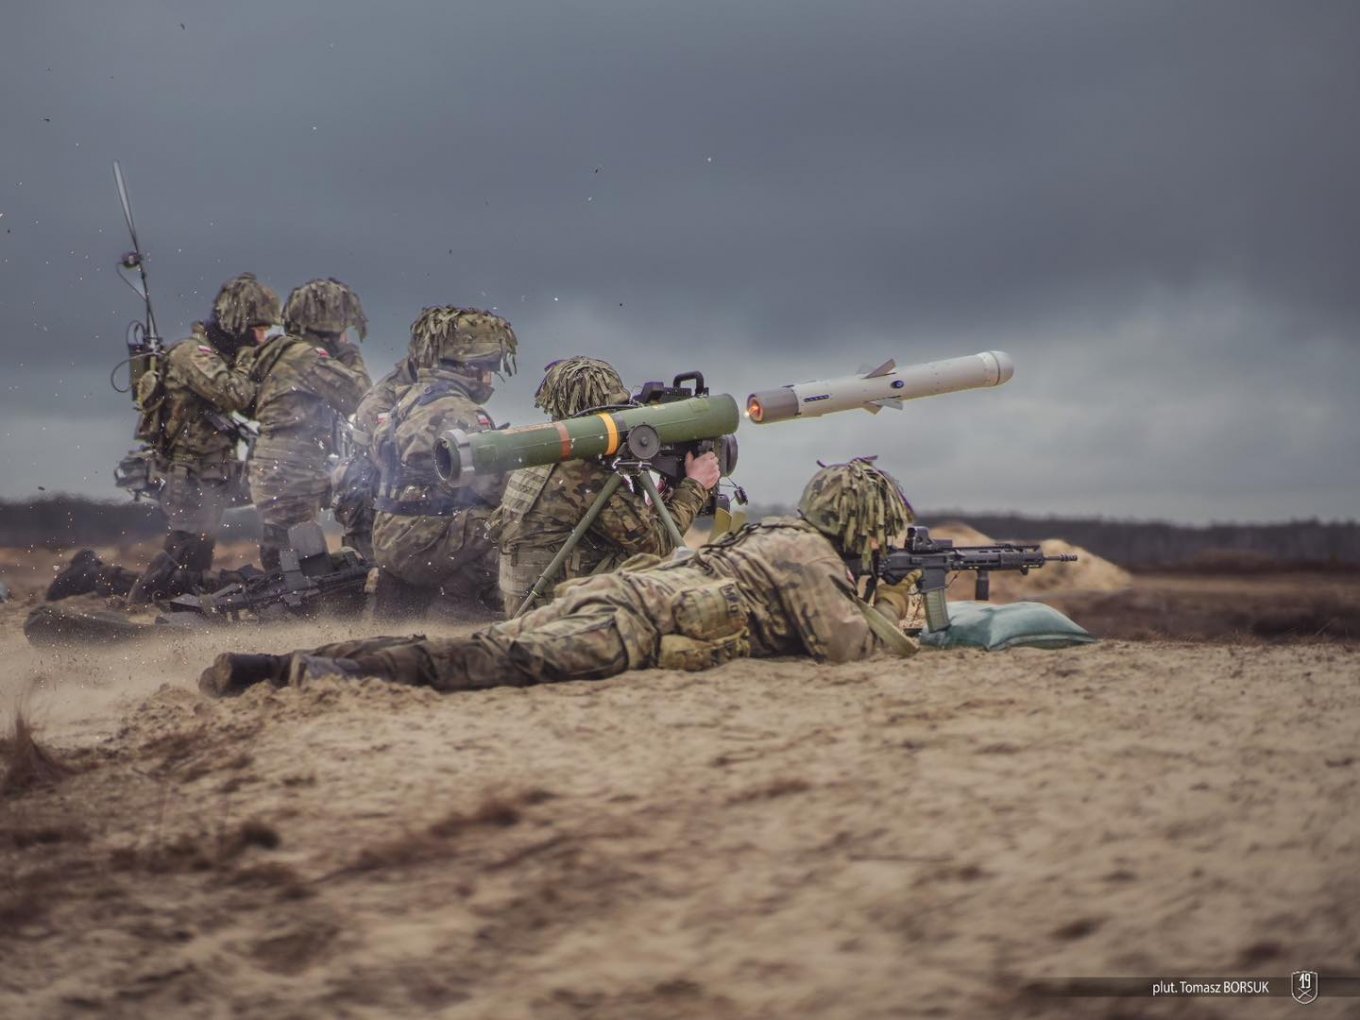 Polish troops operating a Spike anti-tank guided missile system